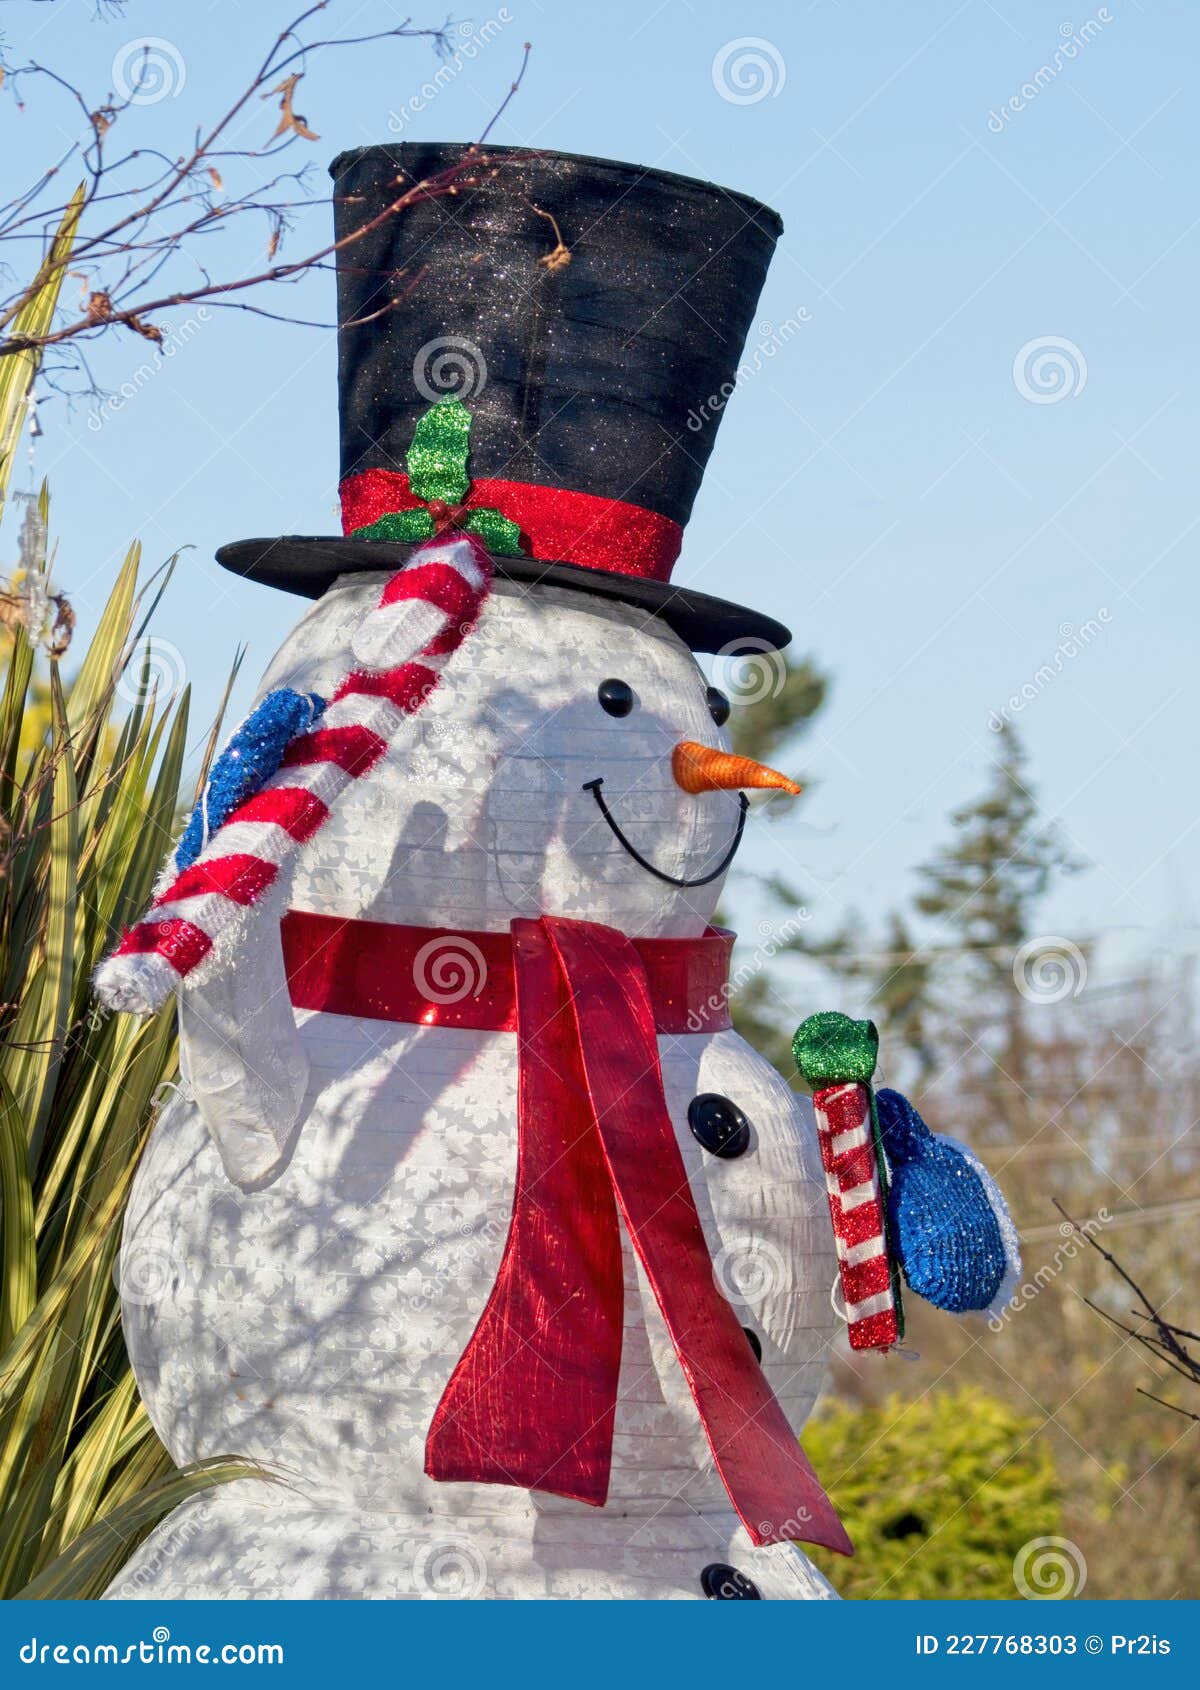 Xmas Blow Up Inflatable Snowman Outdoor Indoor Decorations 5 FT Inflated Snowman with Buffalo Check Scarf & Gloves Joliyoou Plush Inflatable Decoration 